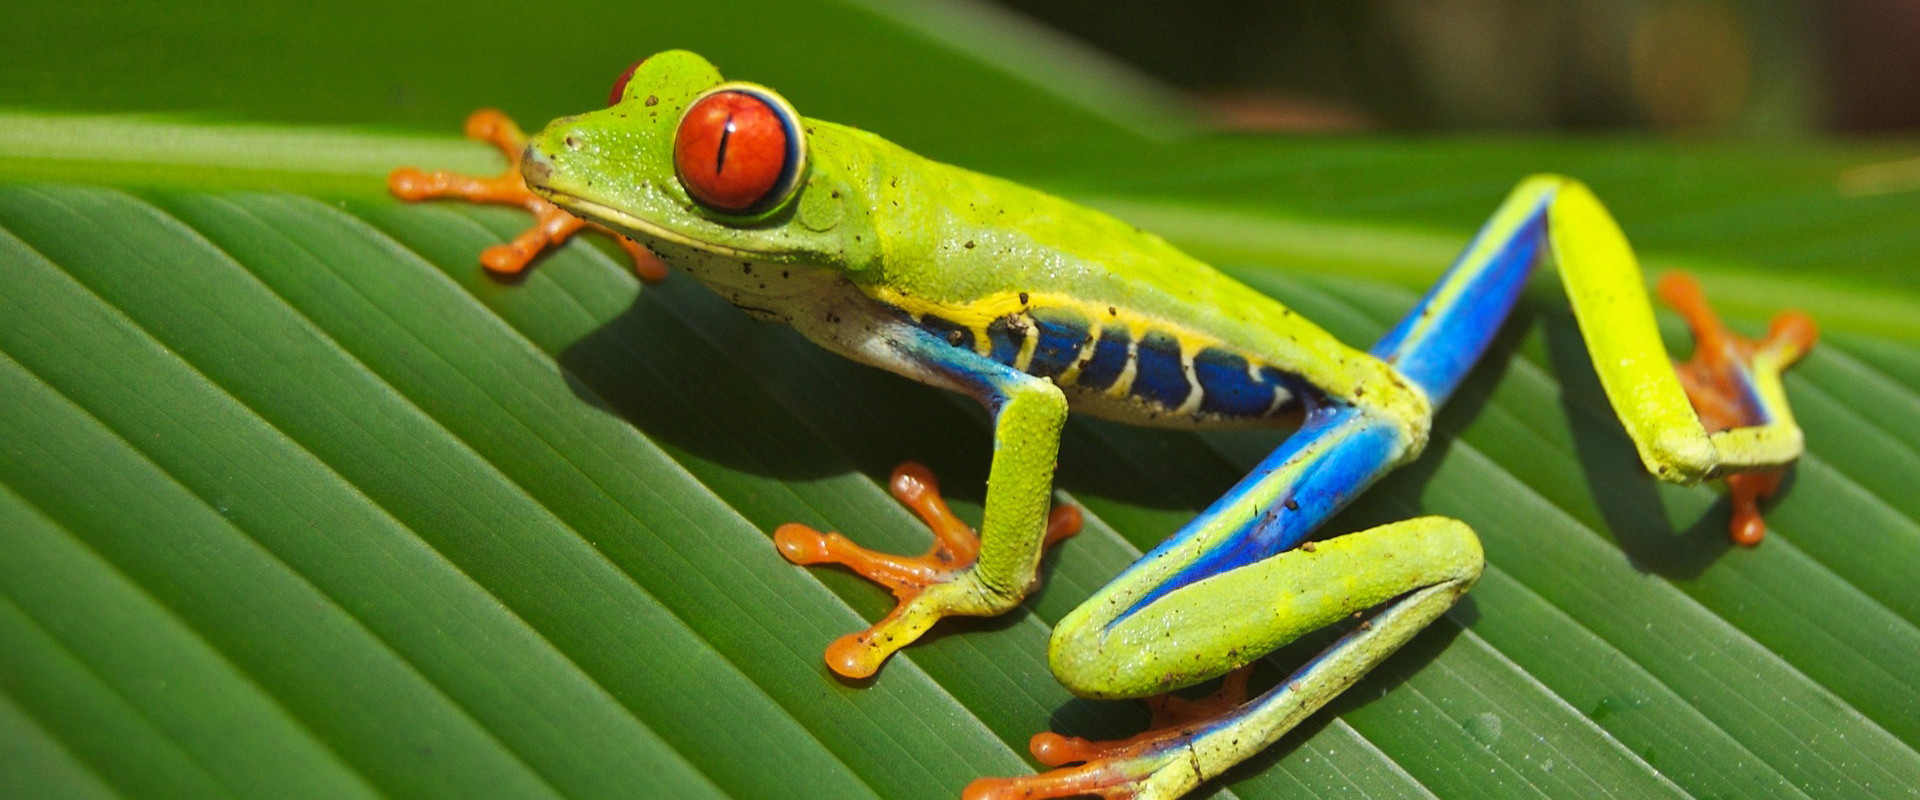 Costa Rica | Grenouille aux yeux rouges